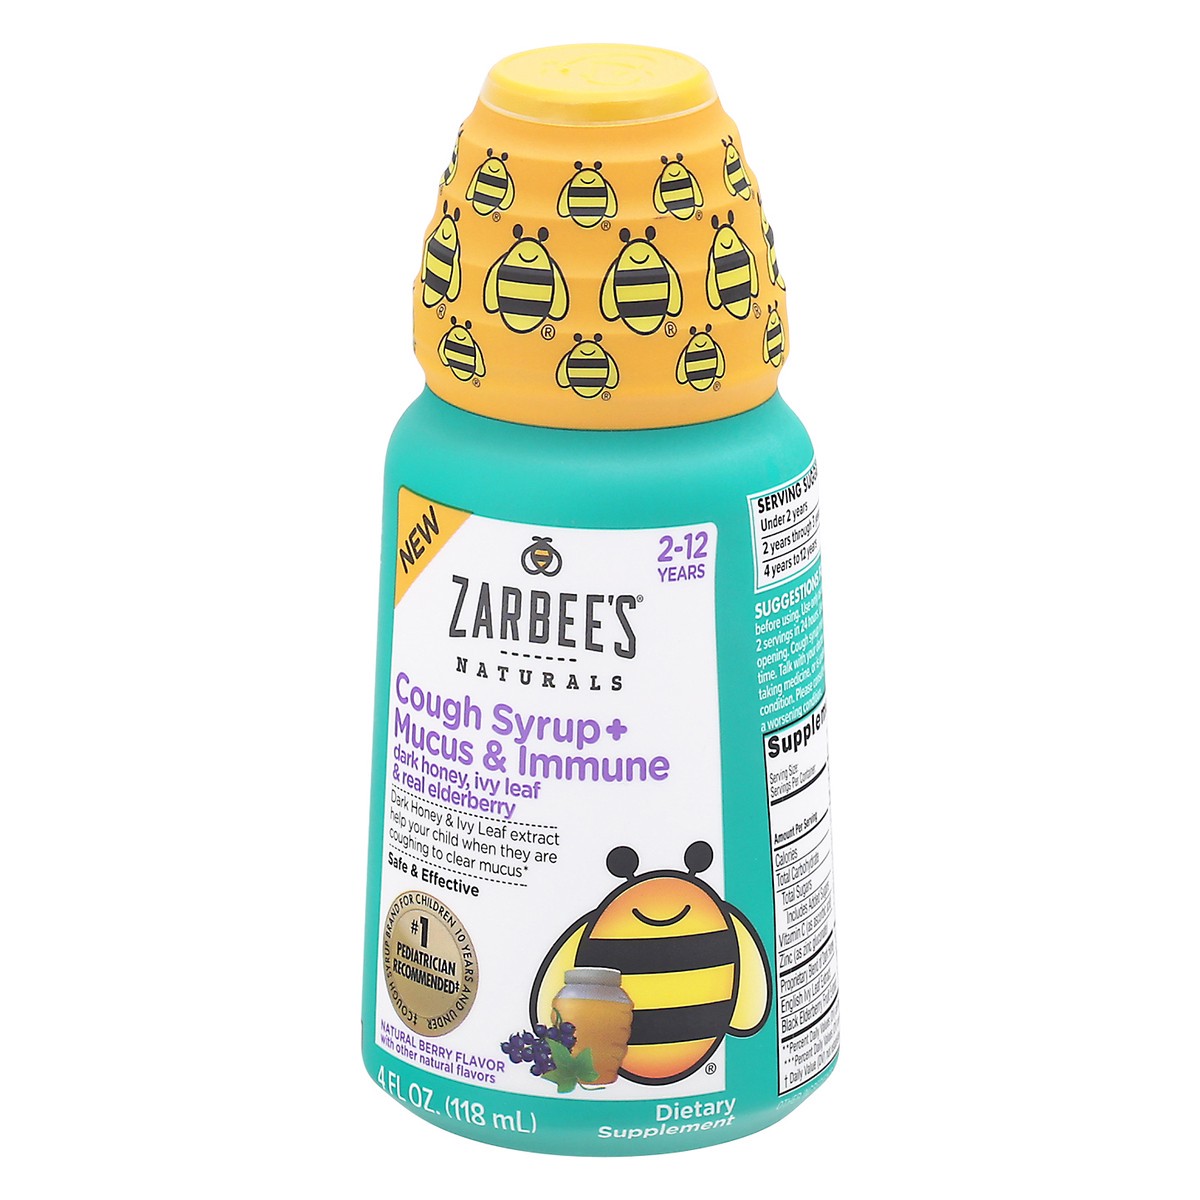 slide 3 of 9, Zarbee's Naturals Naturals 2-12 Years Natural Berry Flavor Cough Syrup + Mucus & Immune 4 fl oz Bottle, 4 fl oz